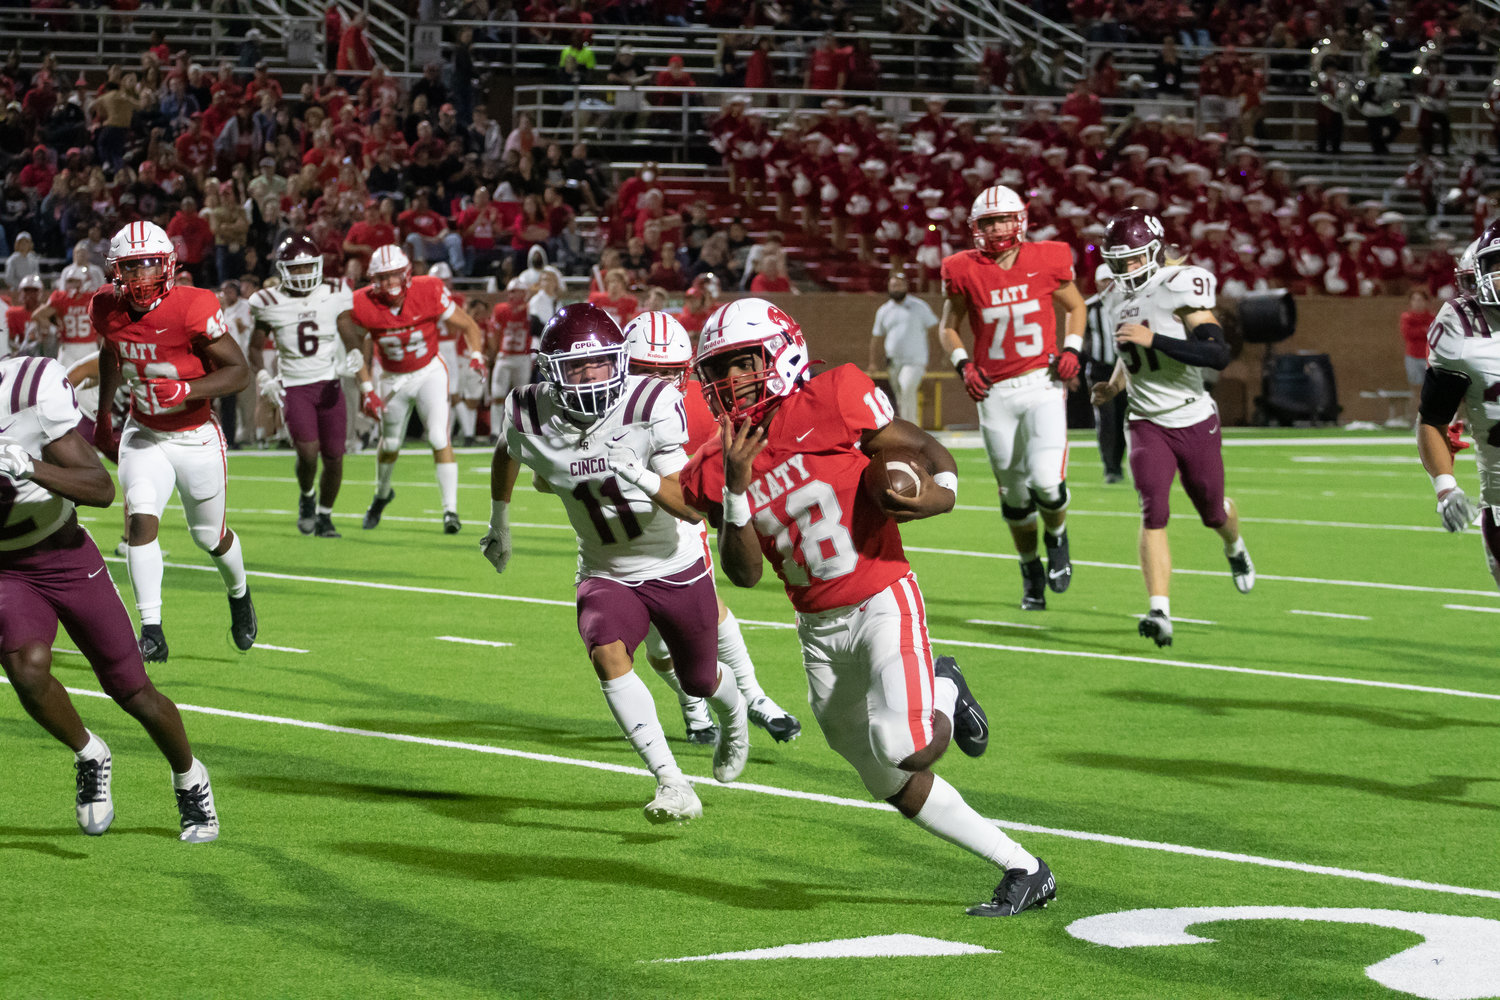 Katy's Dallas Glass runs in a touchdown during Friday's game between Katy and Cinco Ranch at Rhodes Stadium.